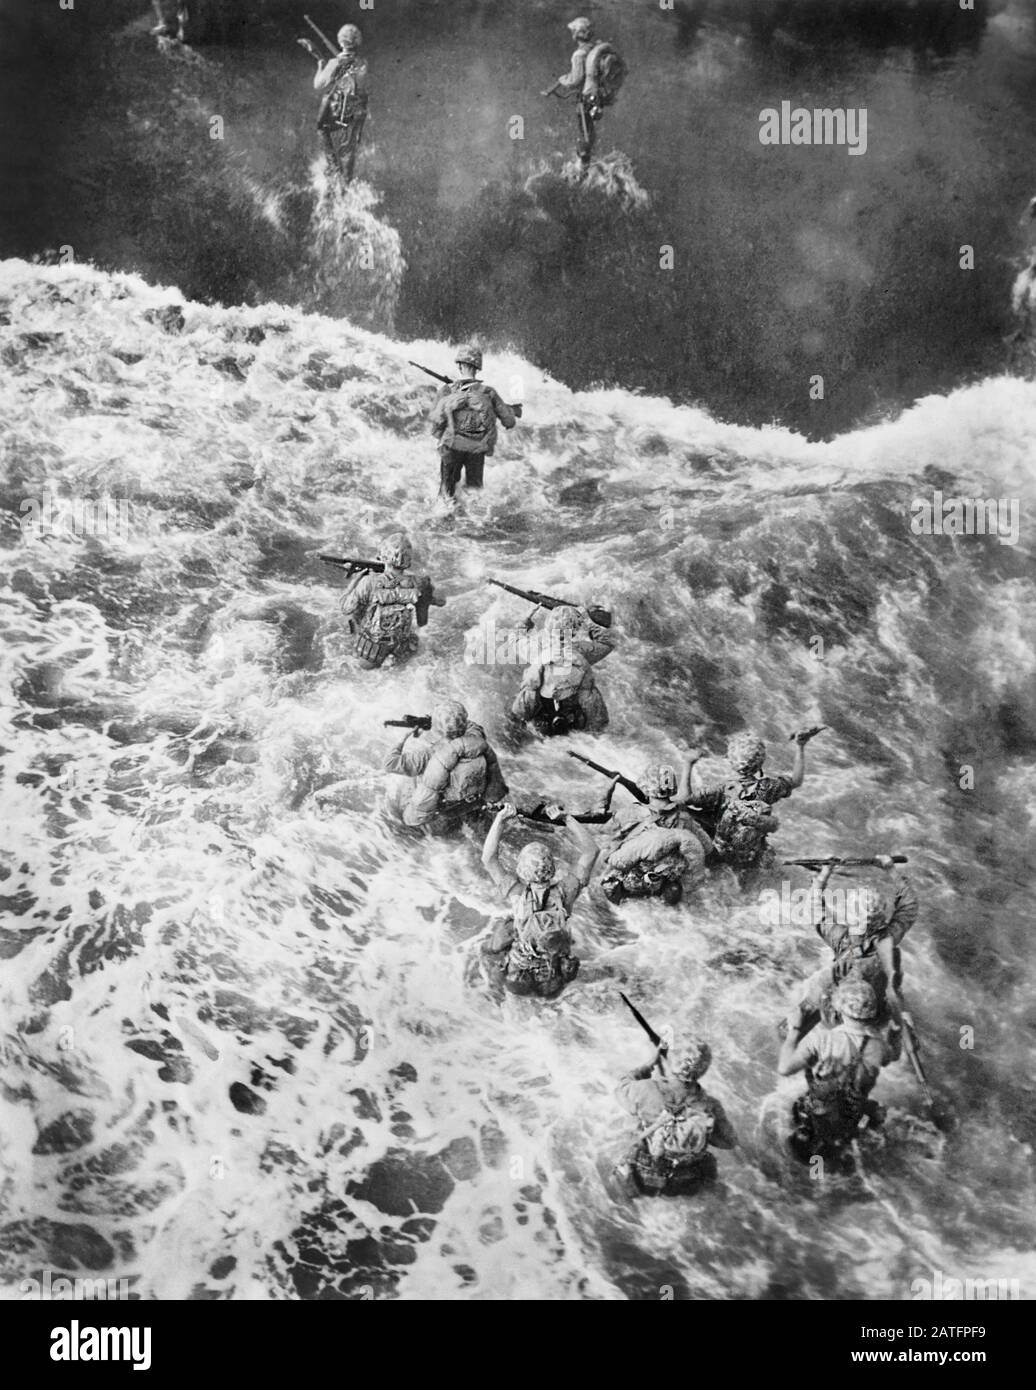 U.S. Marines hit three feet of water as they leave their LST to take the Beach at Cape Gloucester, Papua New Guinea, U.S. Department of Defense, U.S. Marine Corps photo, December 26, 1943 Stock Photo